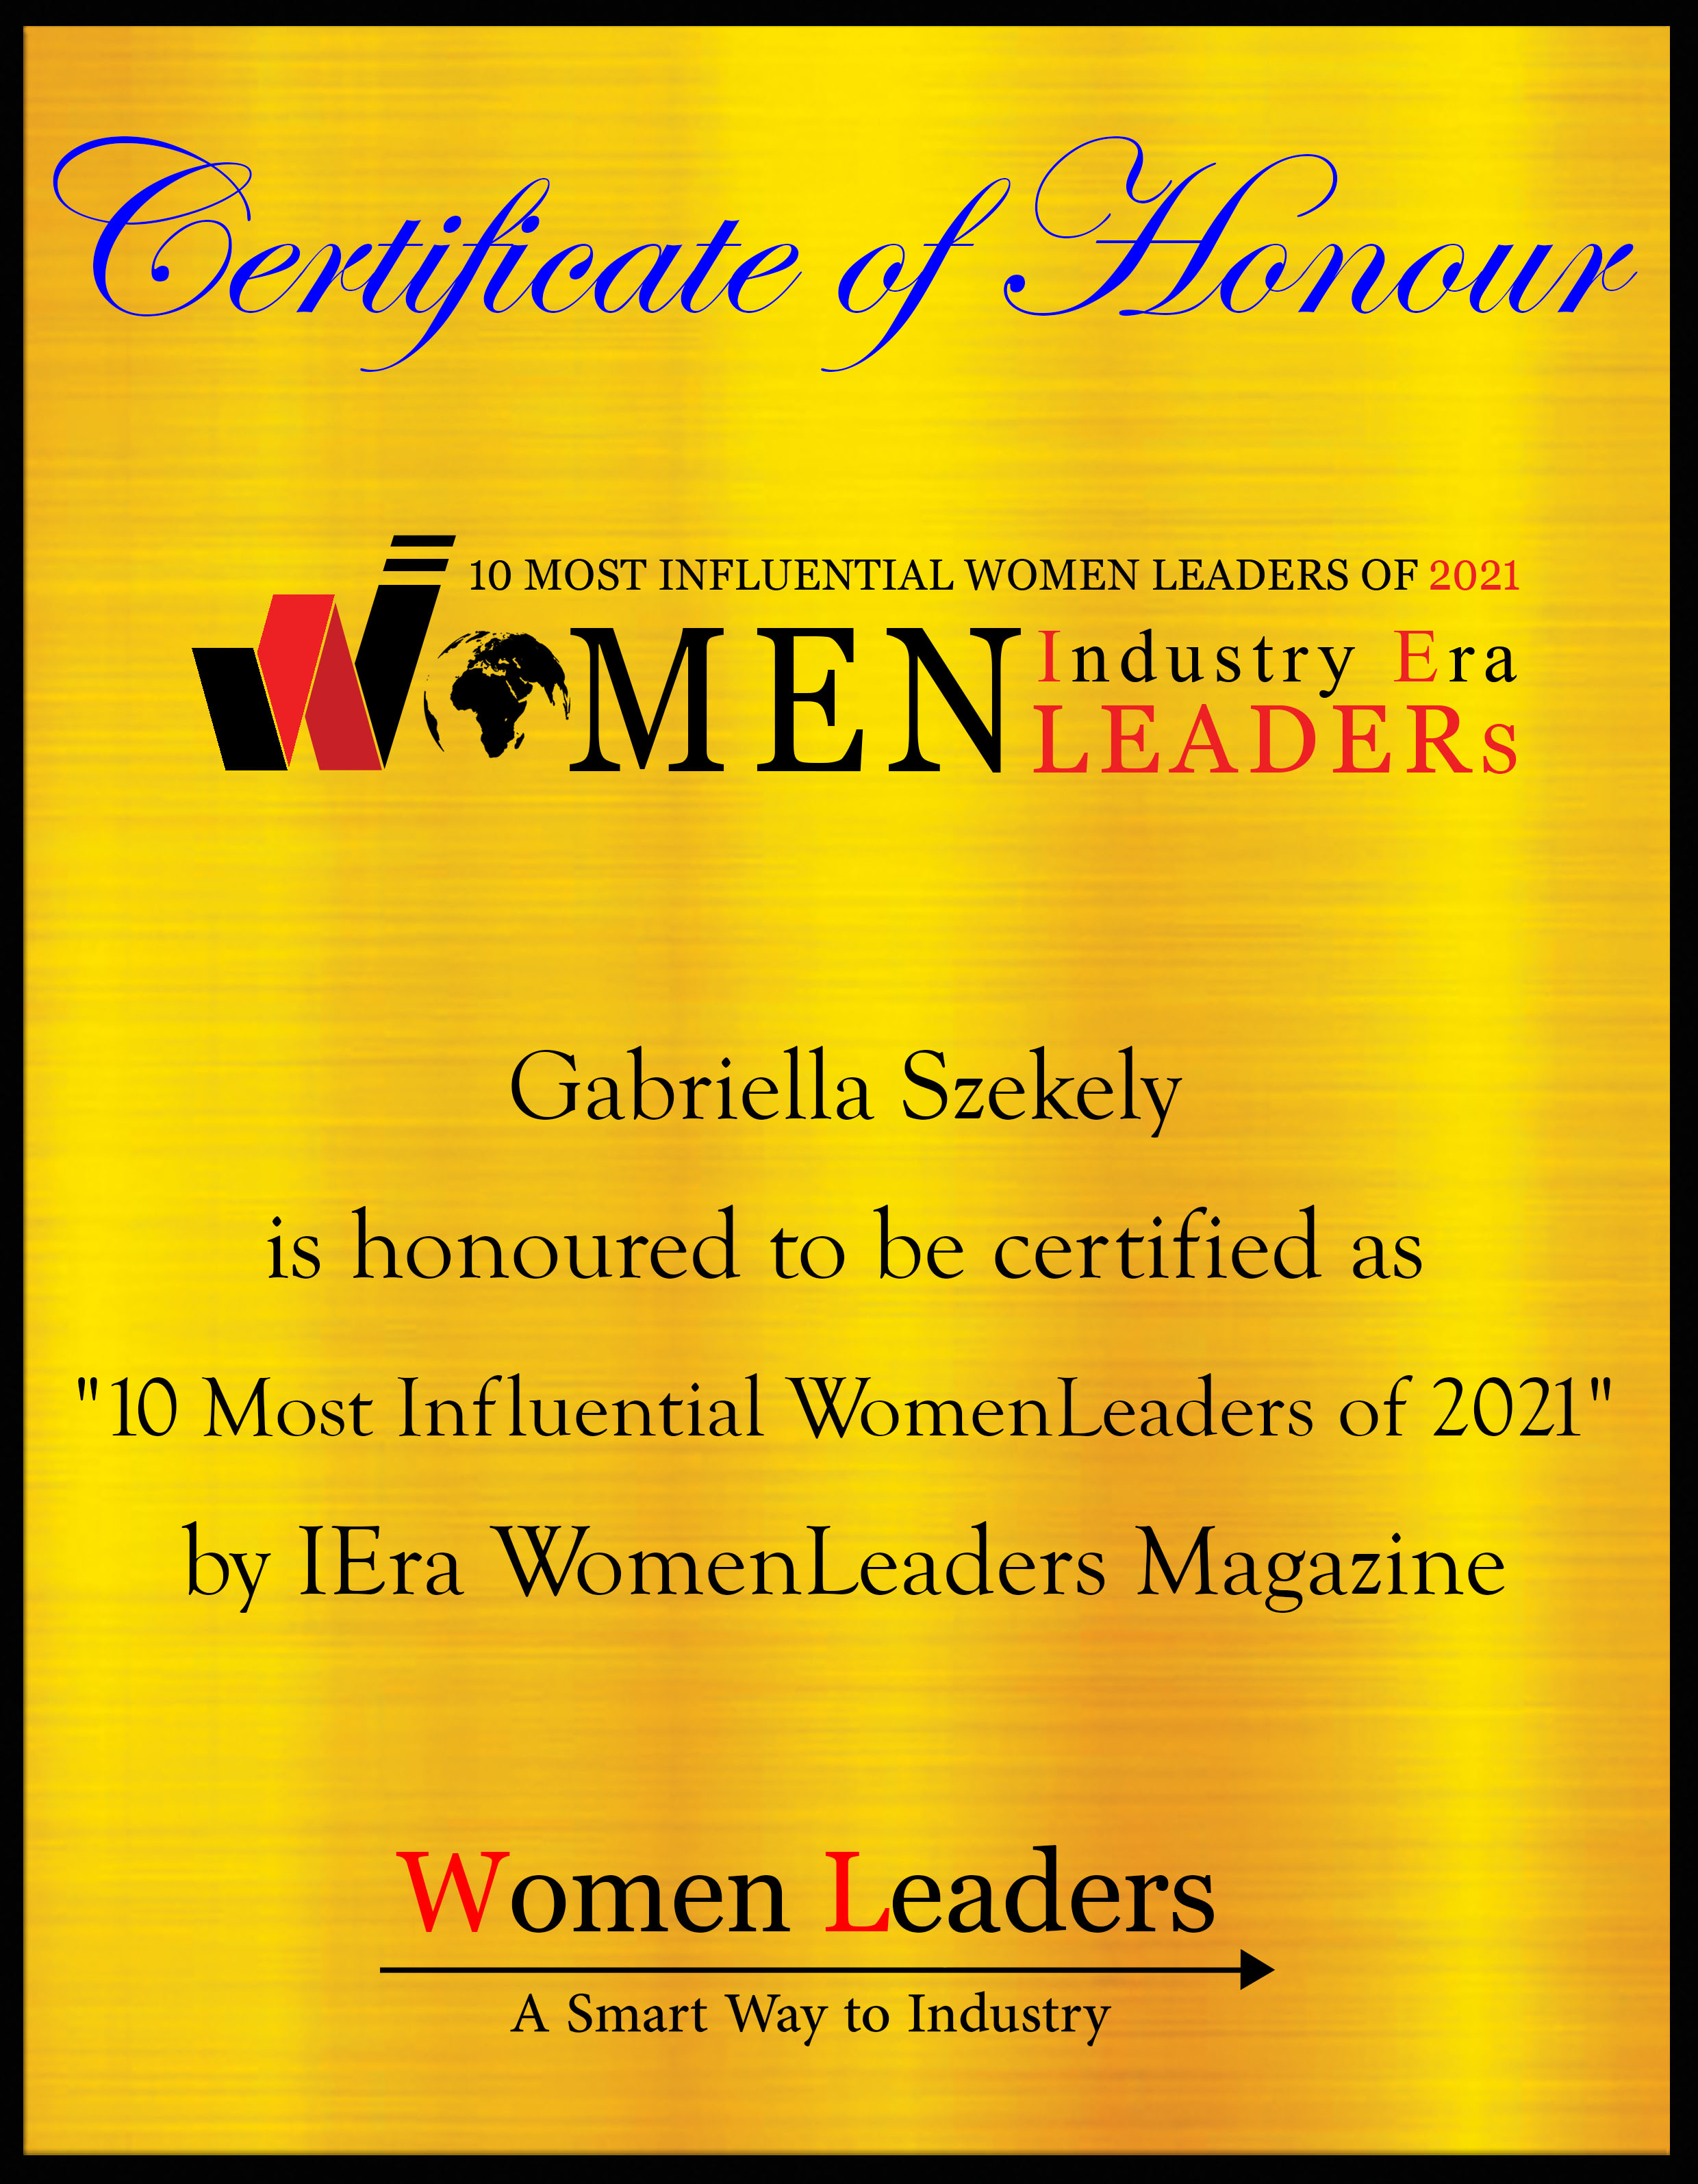 Gabriella Szekely VP, Research & Development of Glaukos Corporation, Most Influential WomenLeaders of 2021